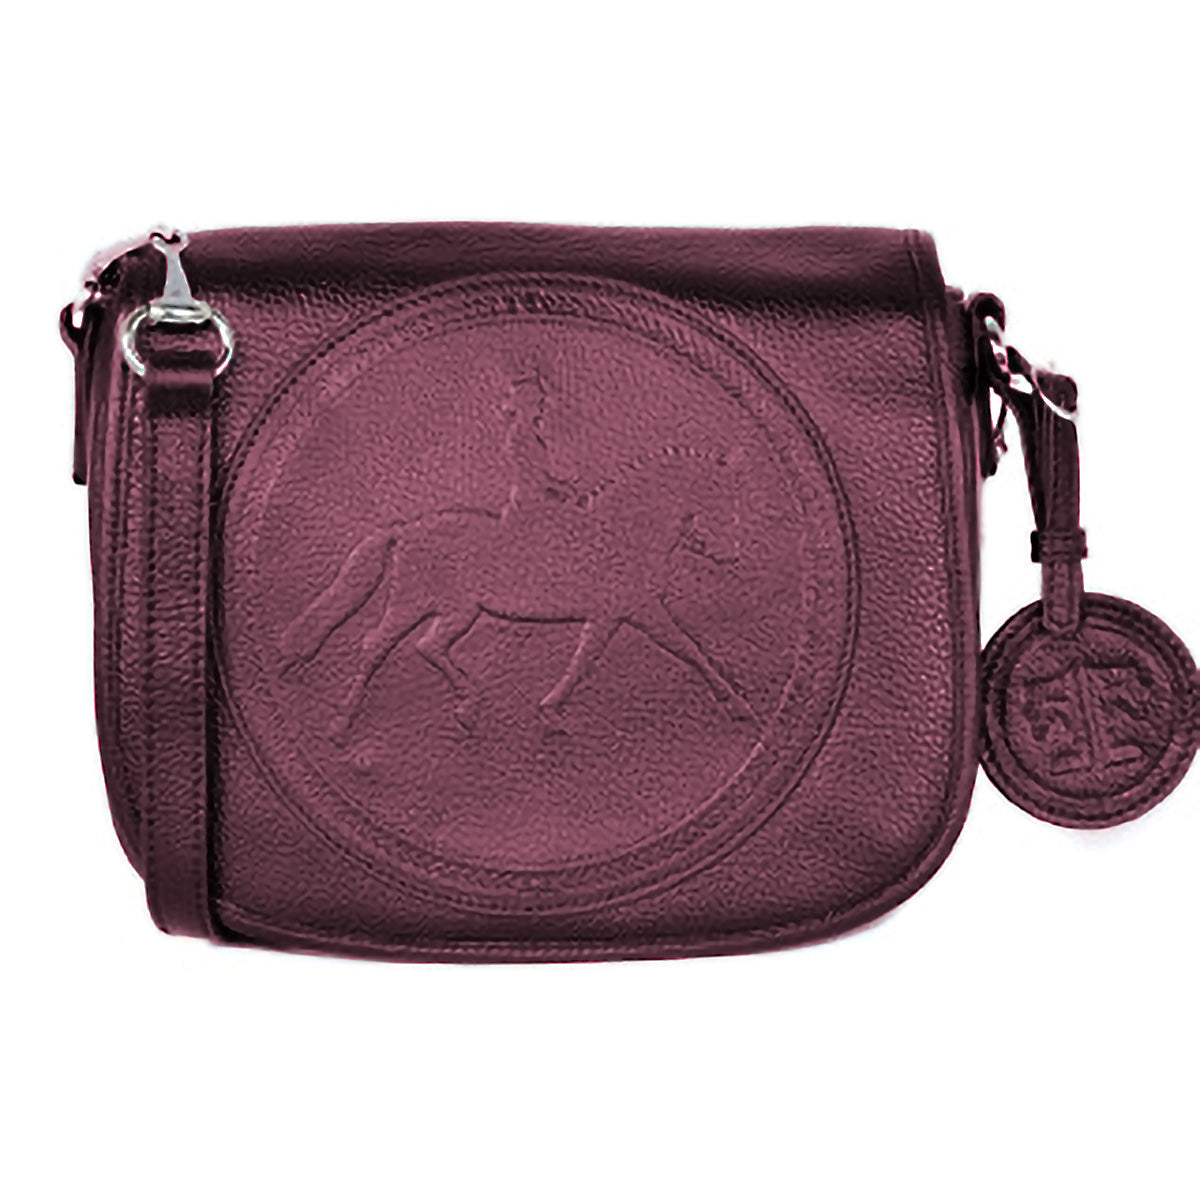 Mulberry Small Classic Grain Leather Zip Coin Pouch, Scarlet